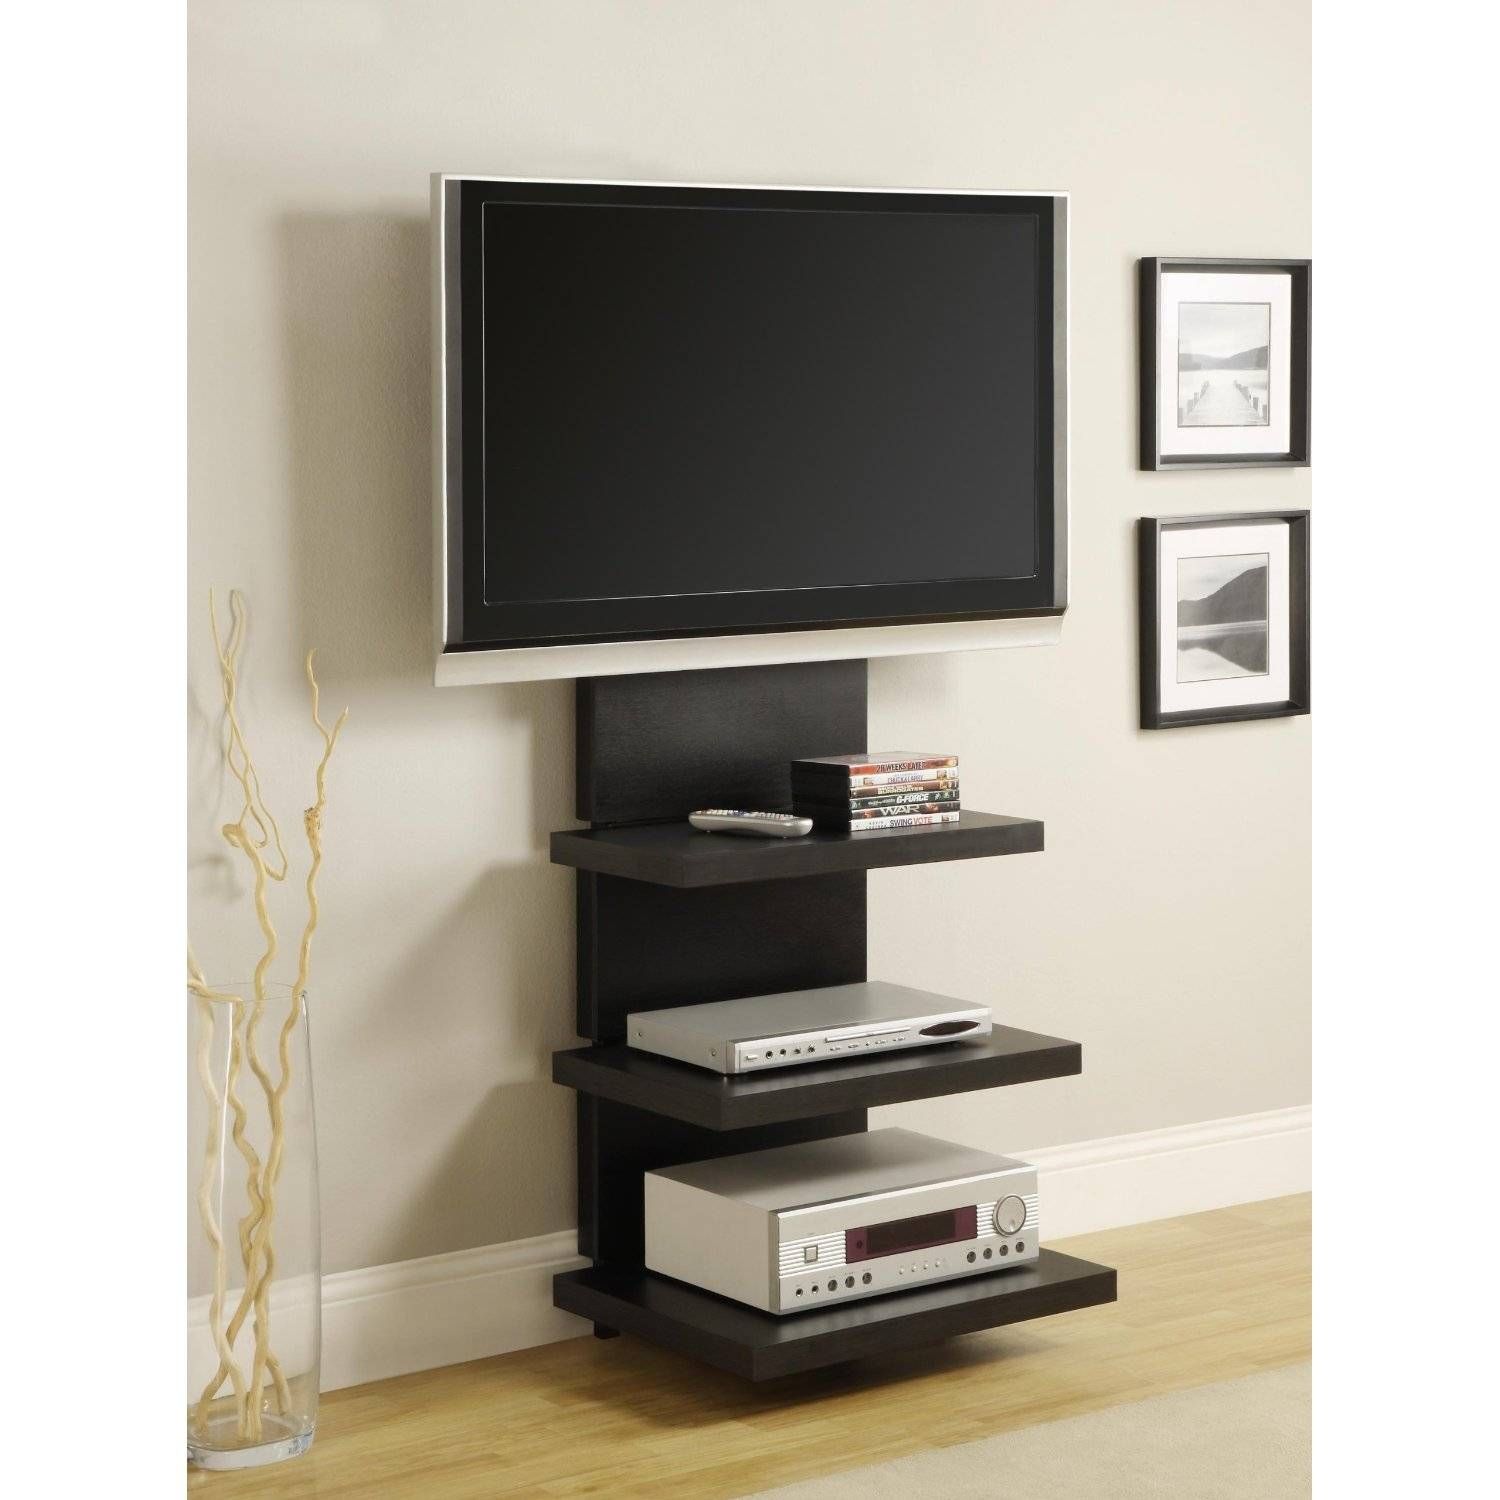 Tall Tv Stand For Bedroom Trends And Images Inside ~ Hamipara In Tall Skinny Tv Stands (View 14 of 15)